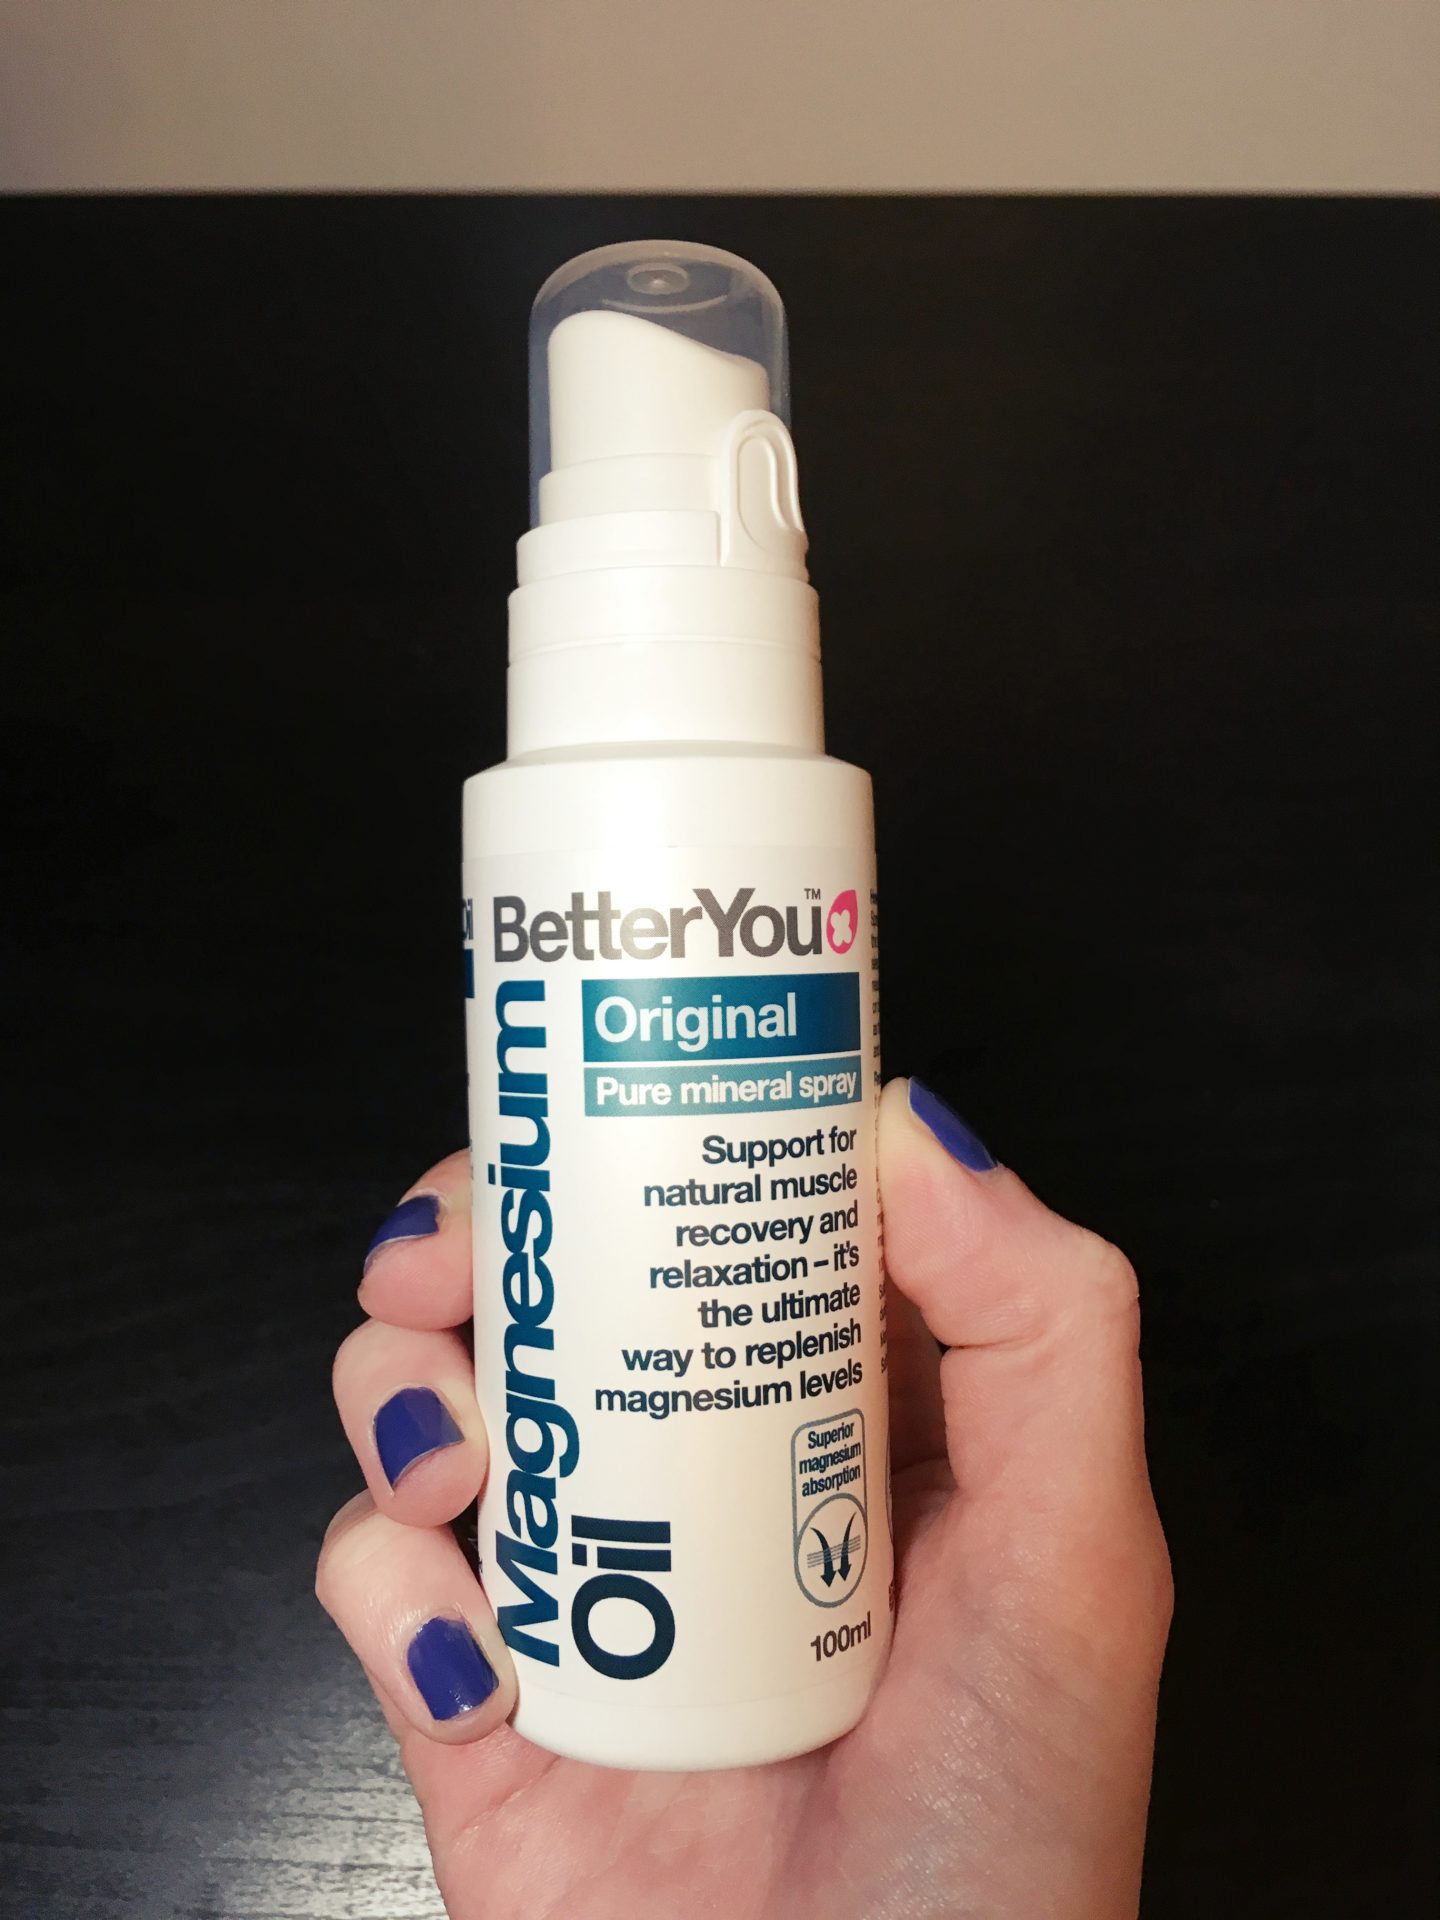 My hand holding the BetterYou Magnesium Oil Spray against a Black background.